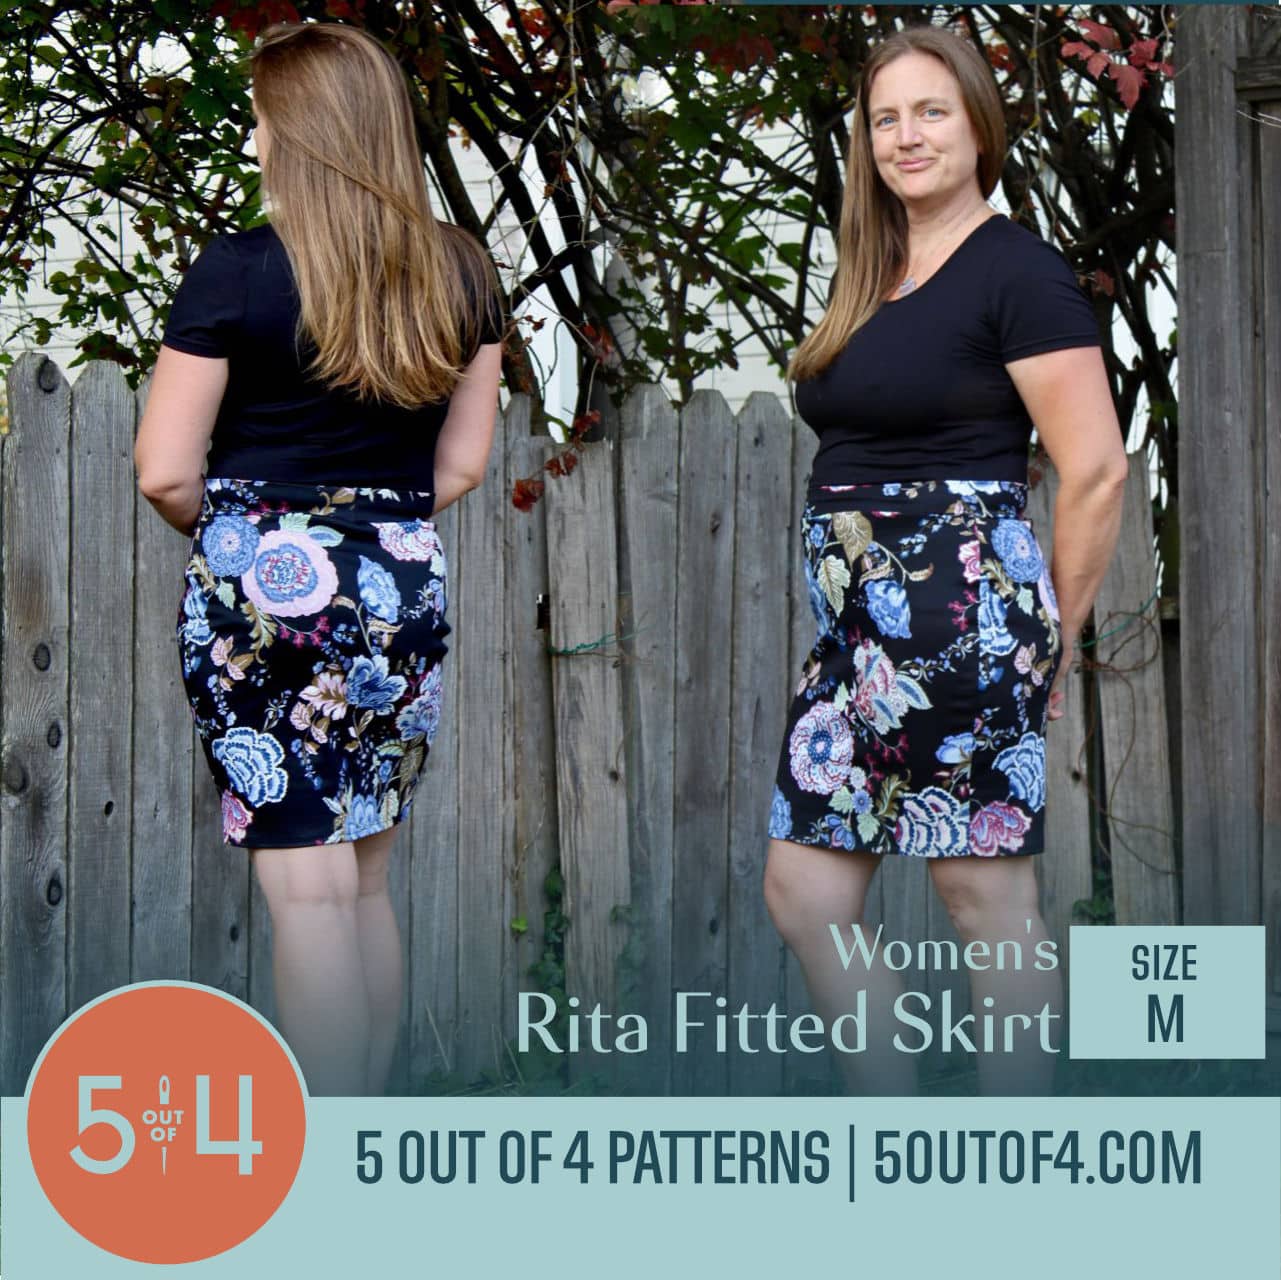 5 out of 4 Women's Rita Fitted Skirt PDF Pattern Instant Download